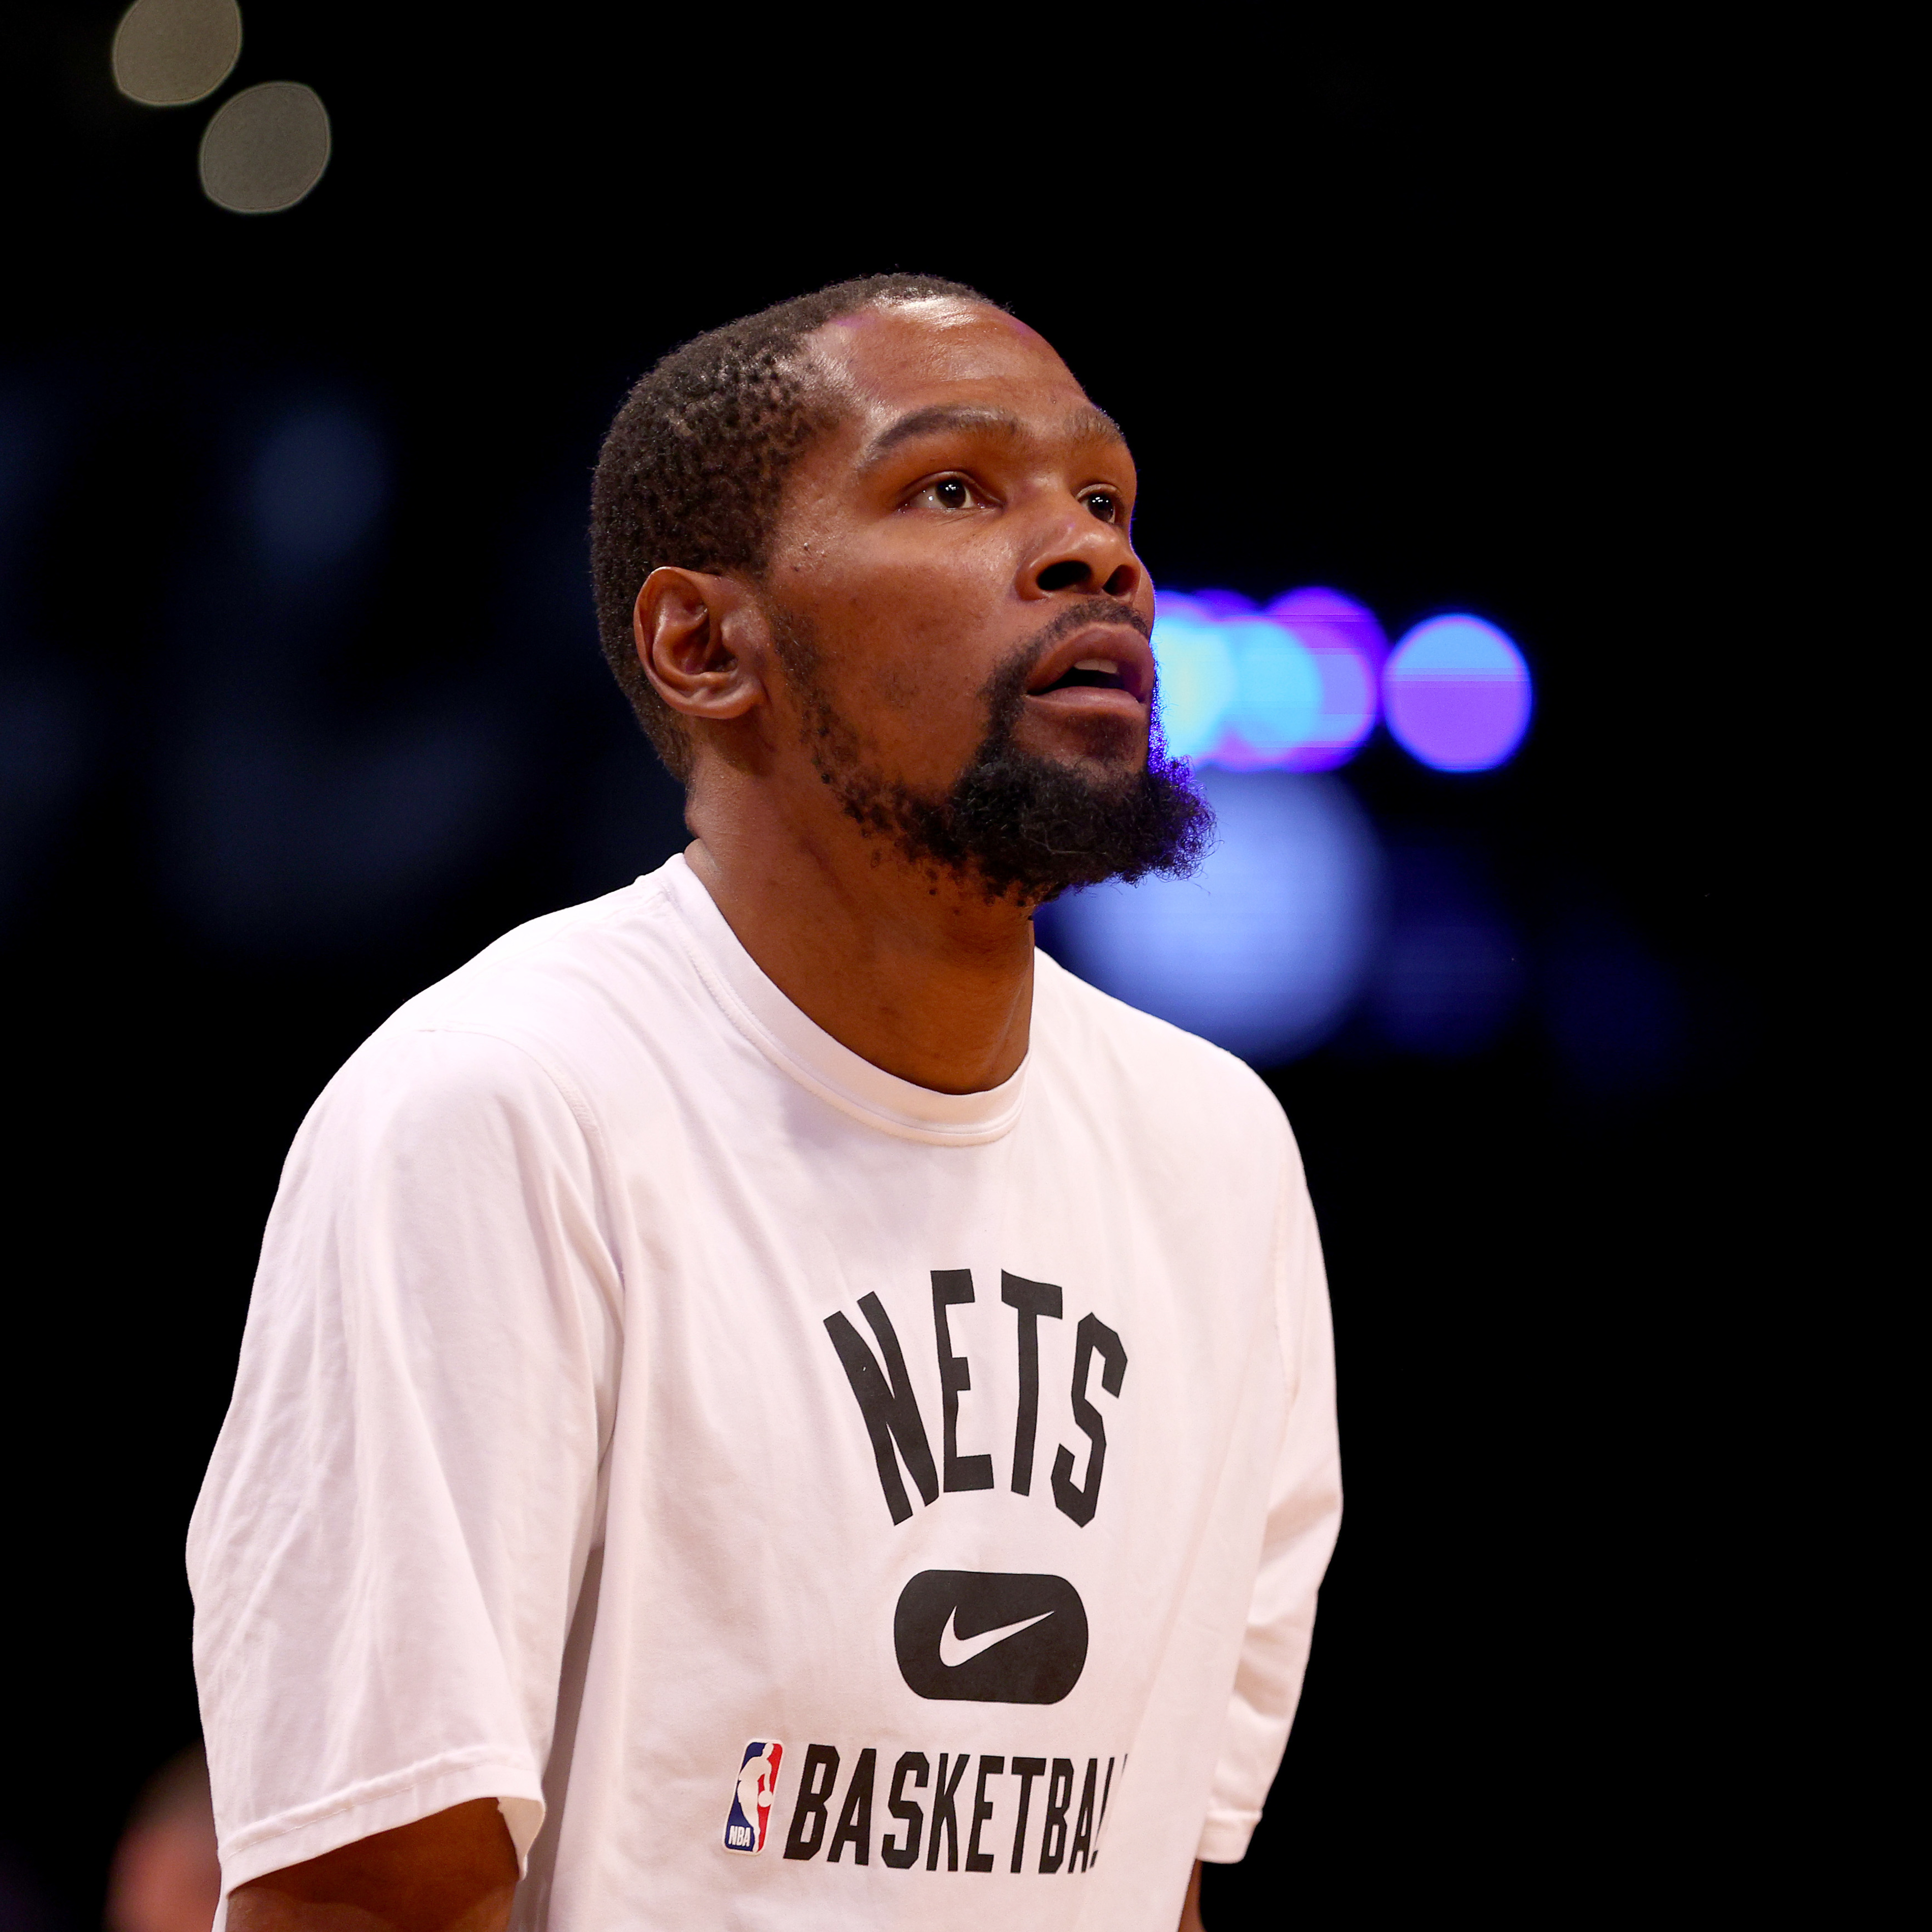 Woj: Kevin Durant 'Absolutely' Could Remain with Nets Despite Trade Rumors